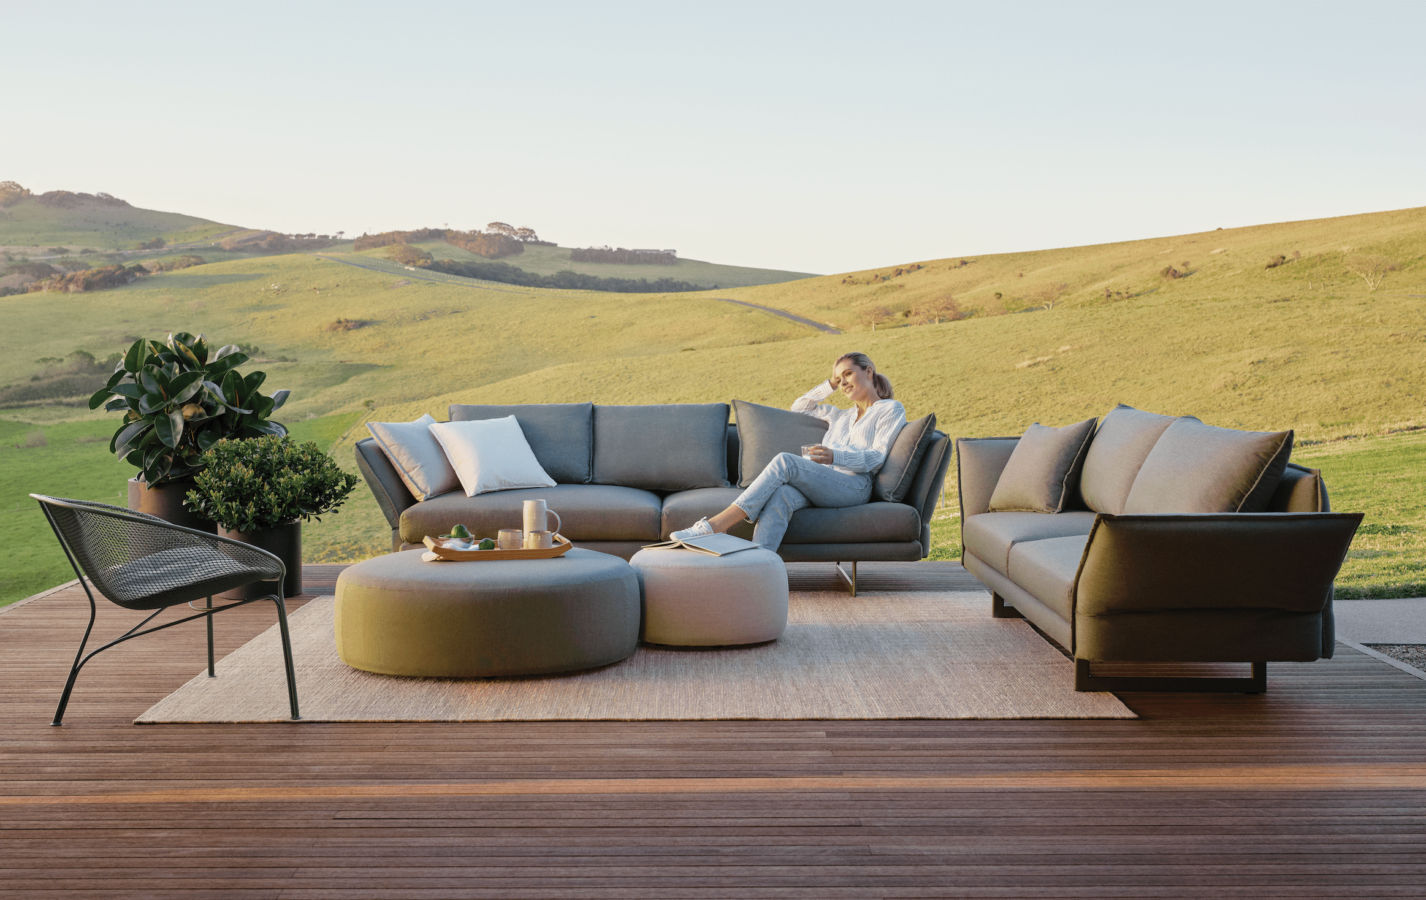 Make living at home more meaningful with an outdoor area inspired by King Living